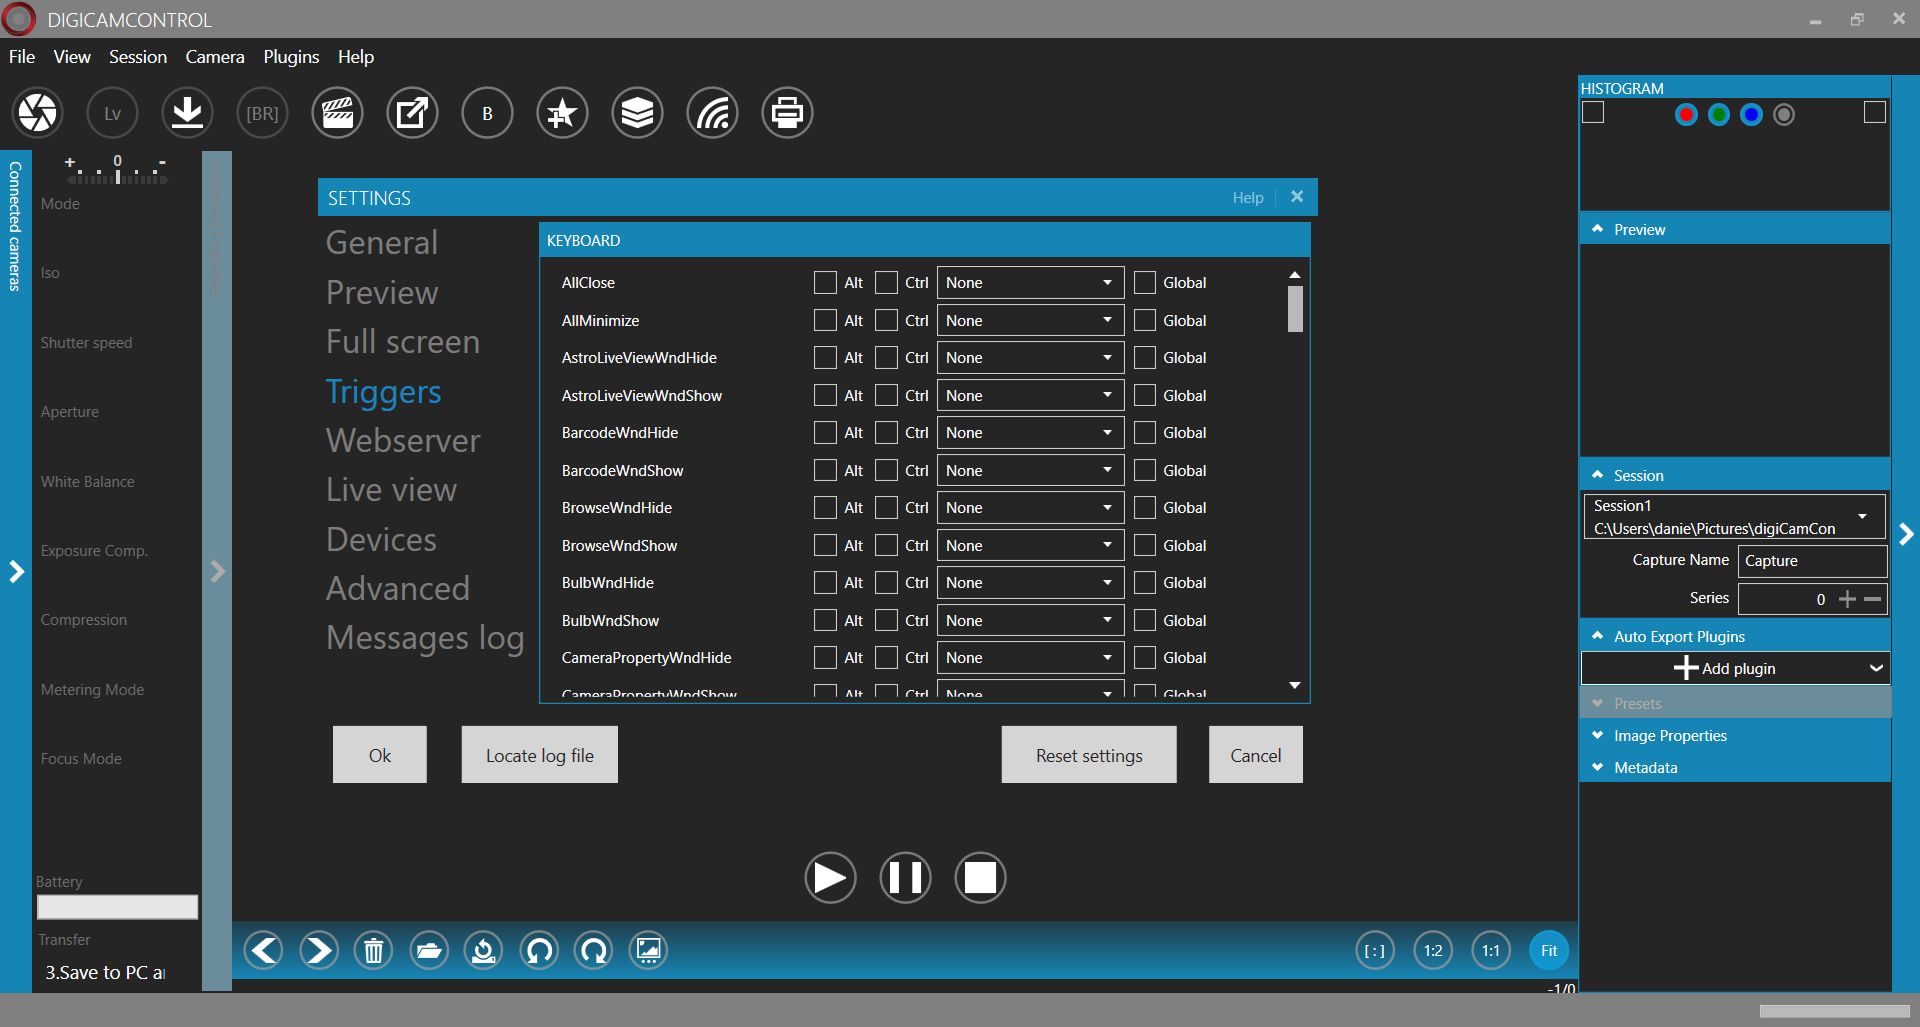 download the last version for android digiCamControl